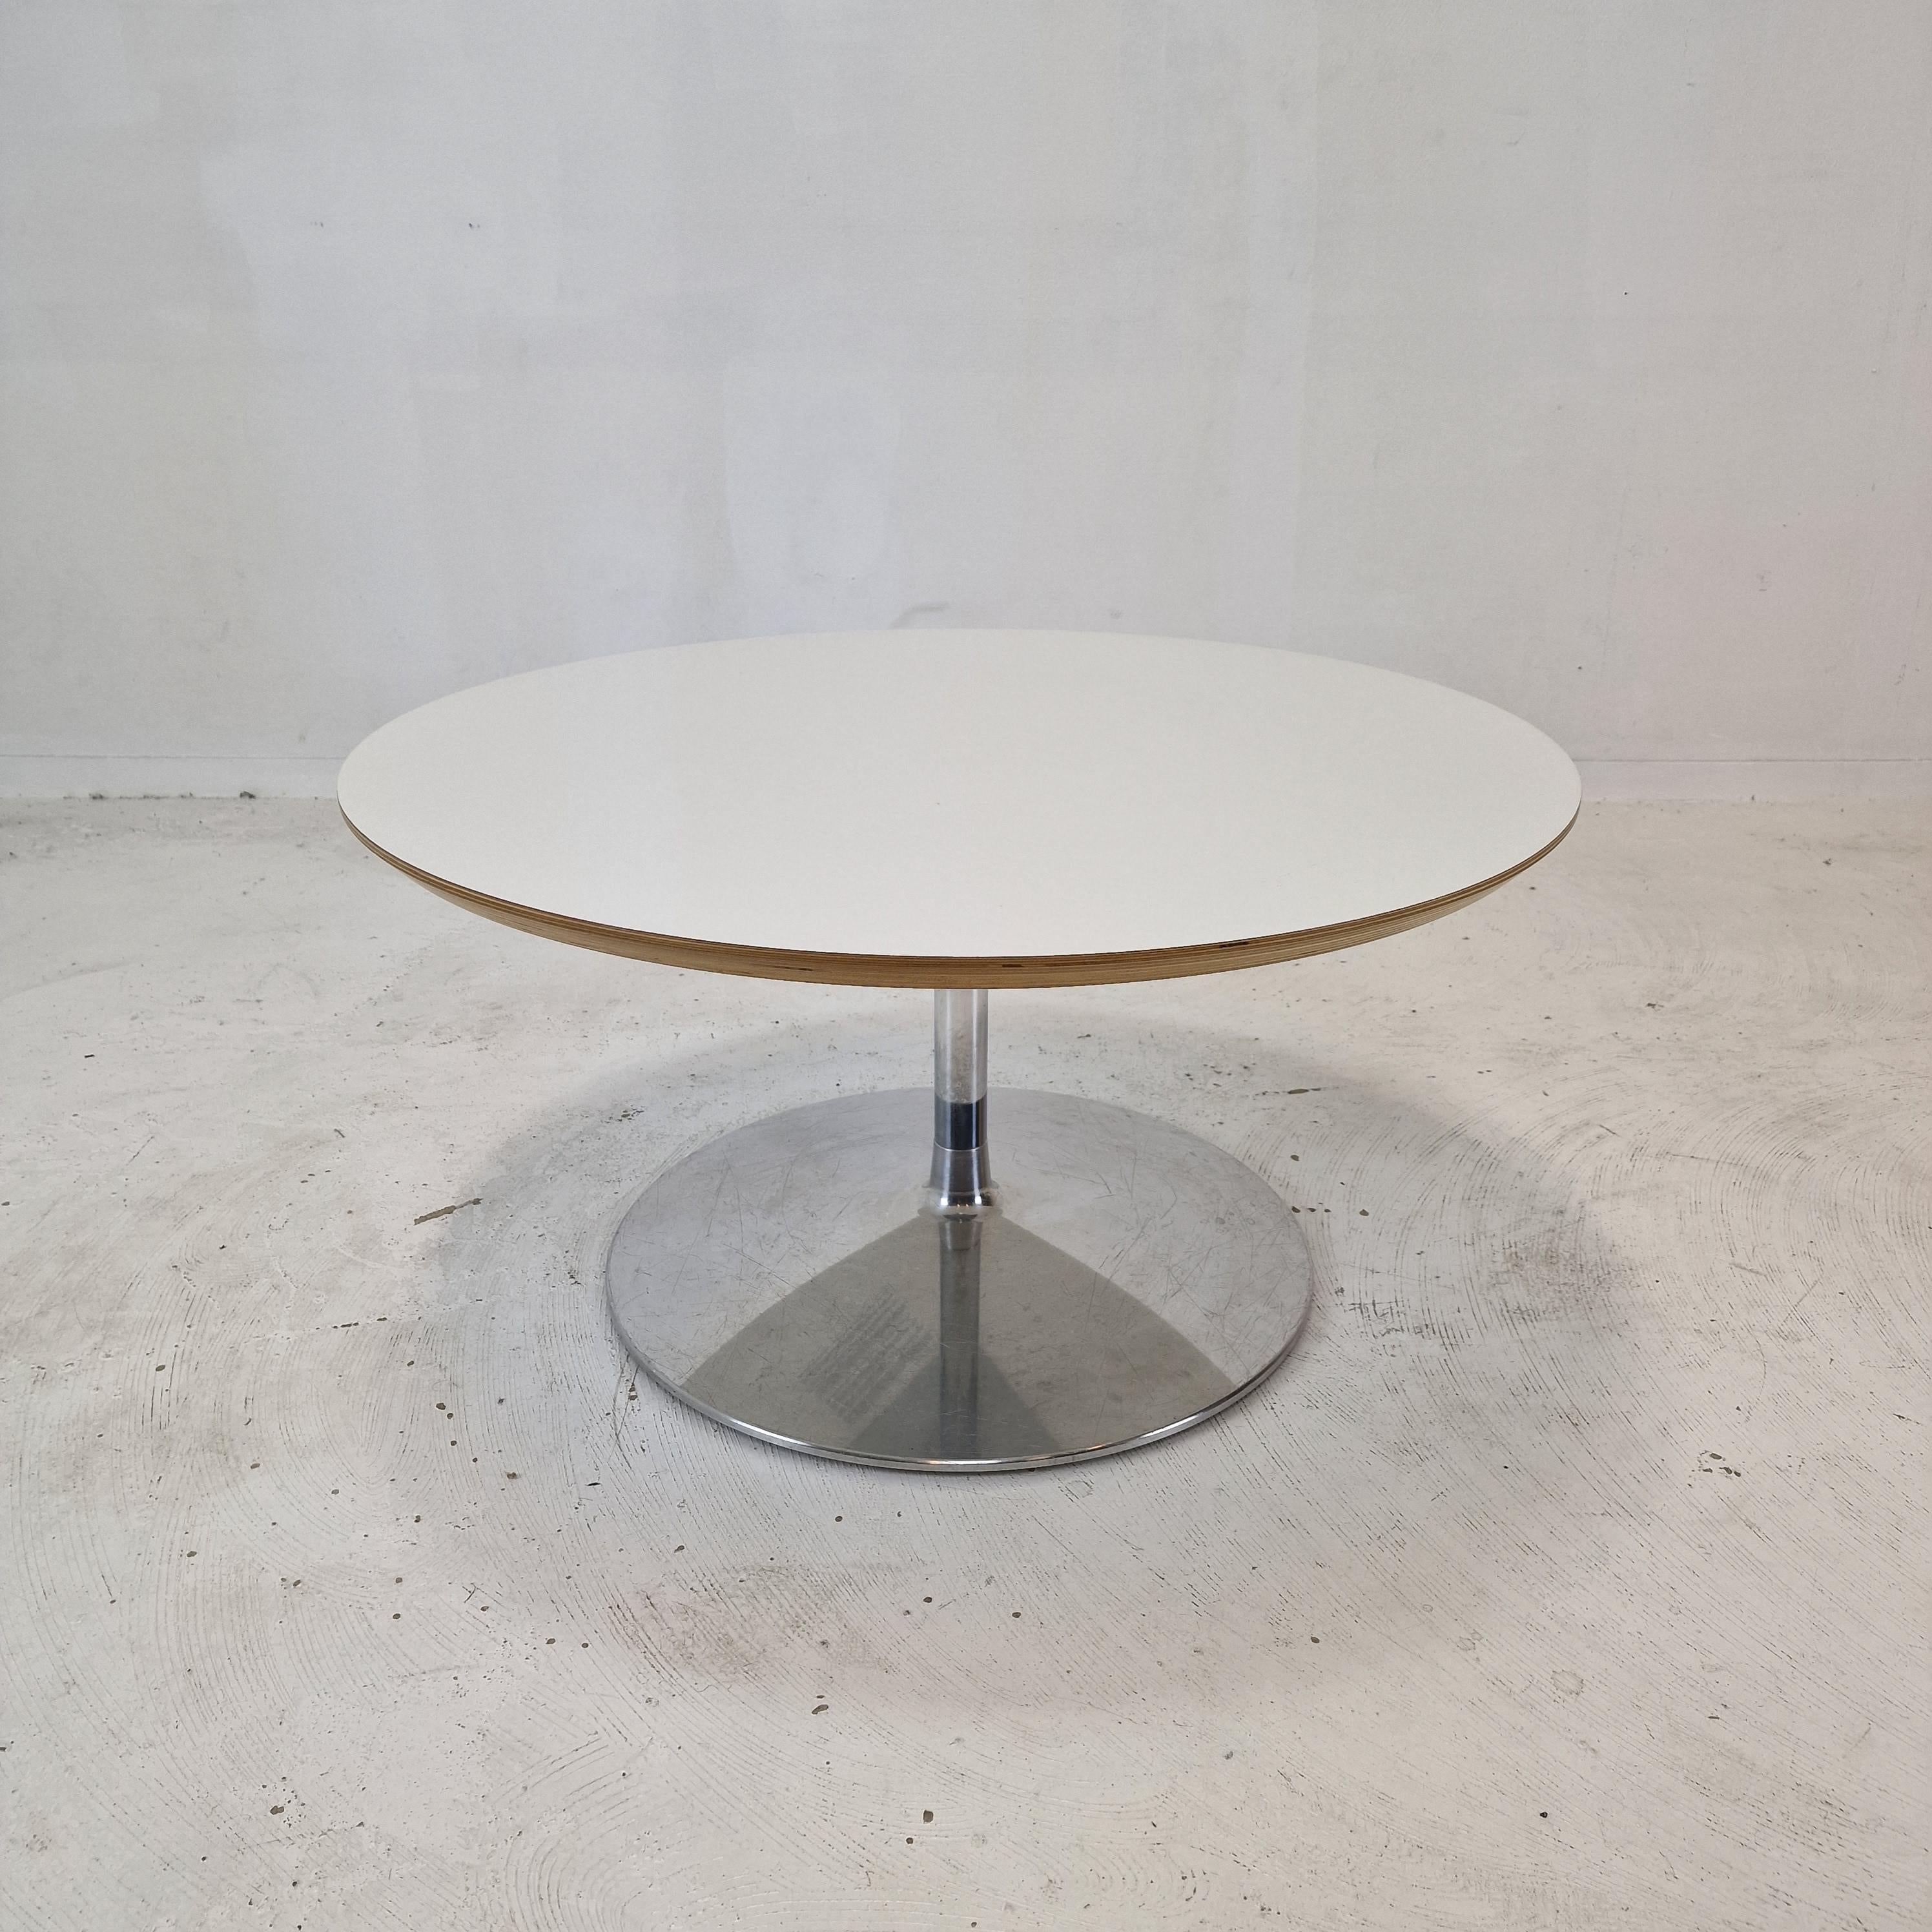 Very nice round coffee table, designed by Pierre Paulin in the 1960s. 
This particular table is fabricated around 2000.

The name of the table is 